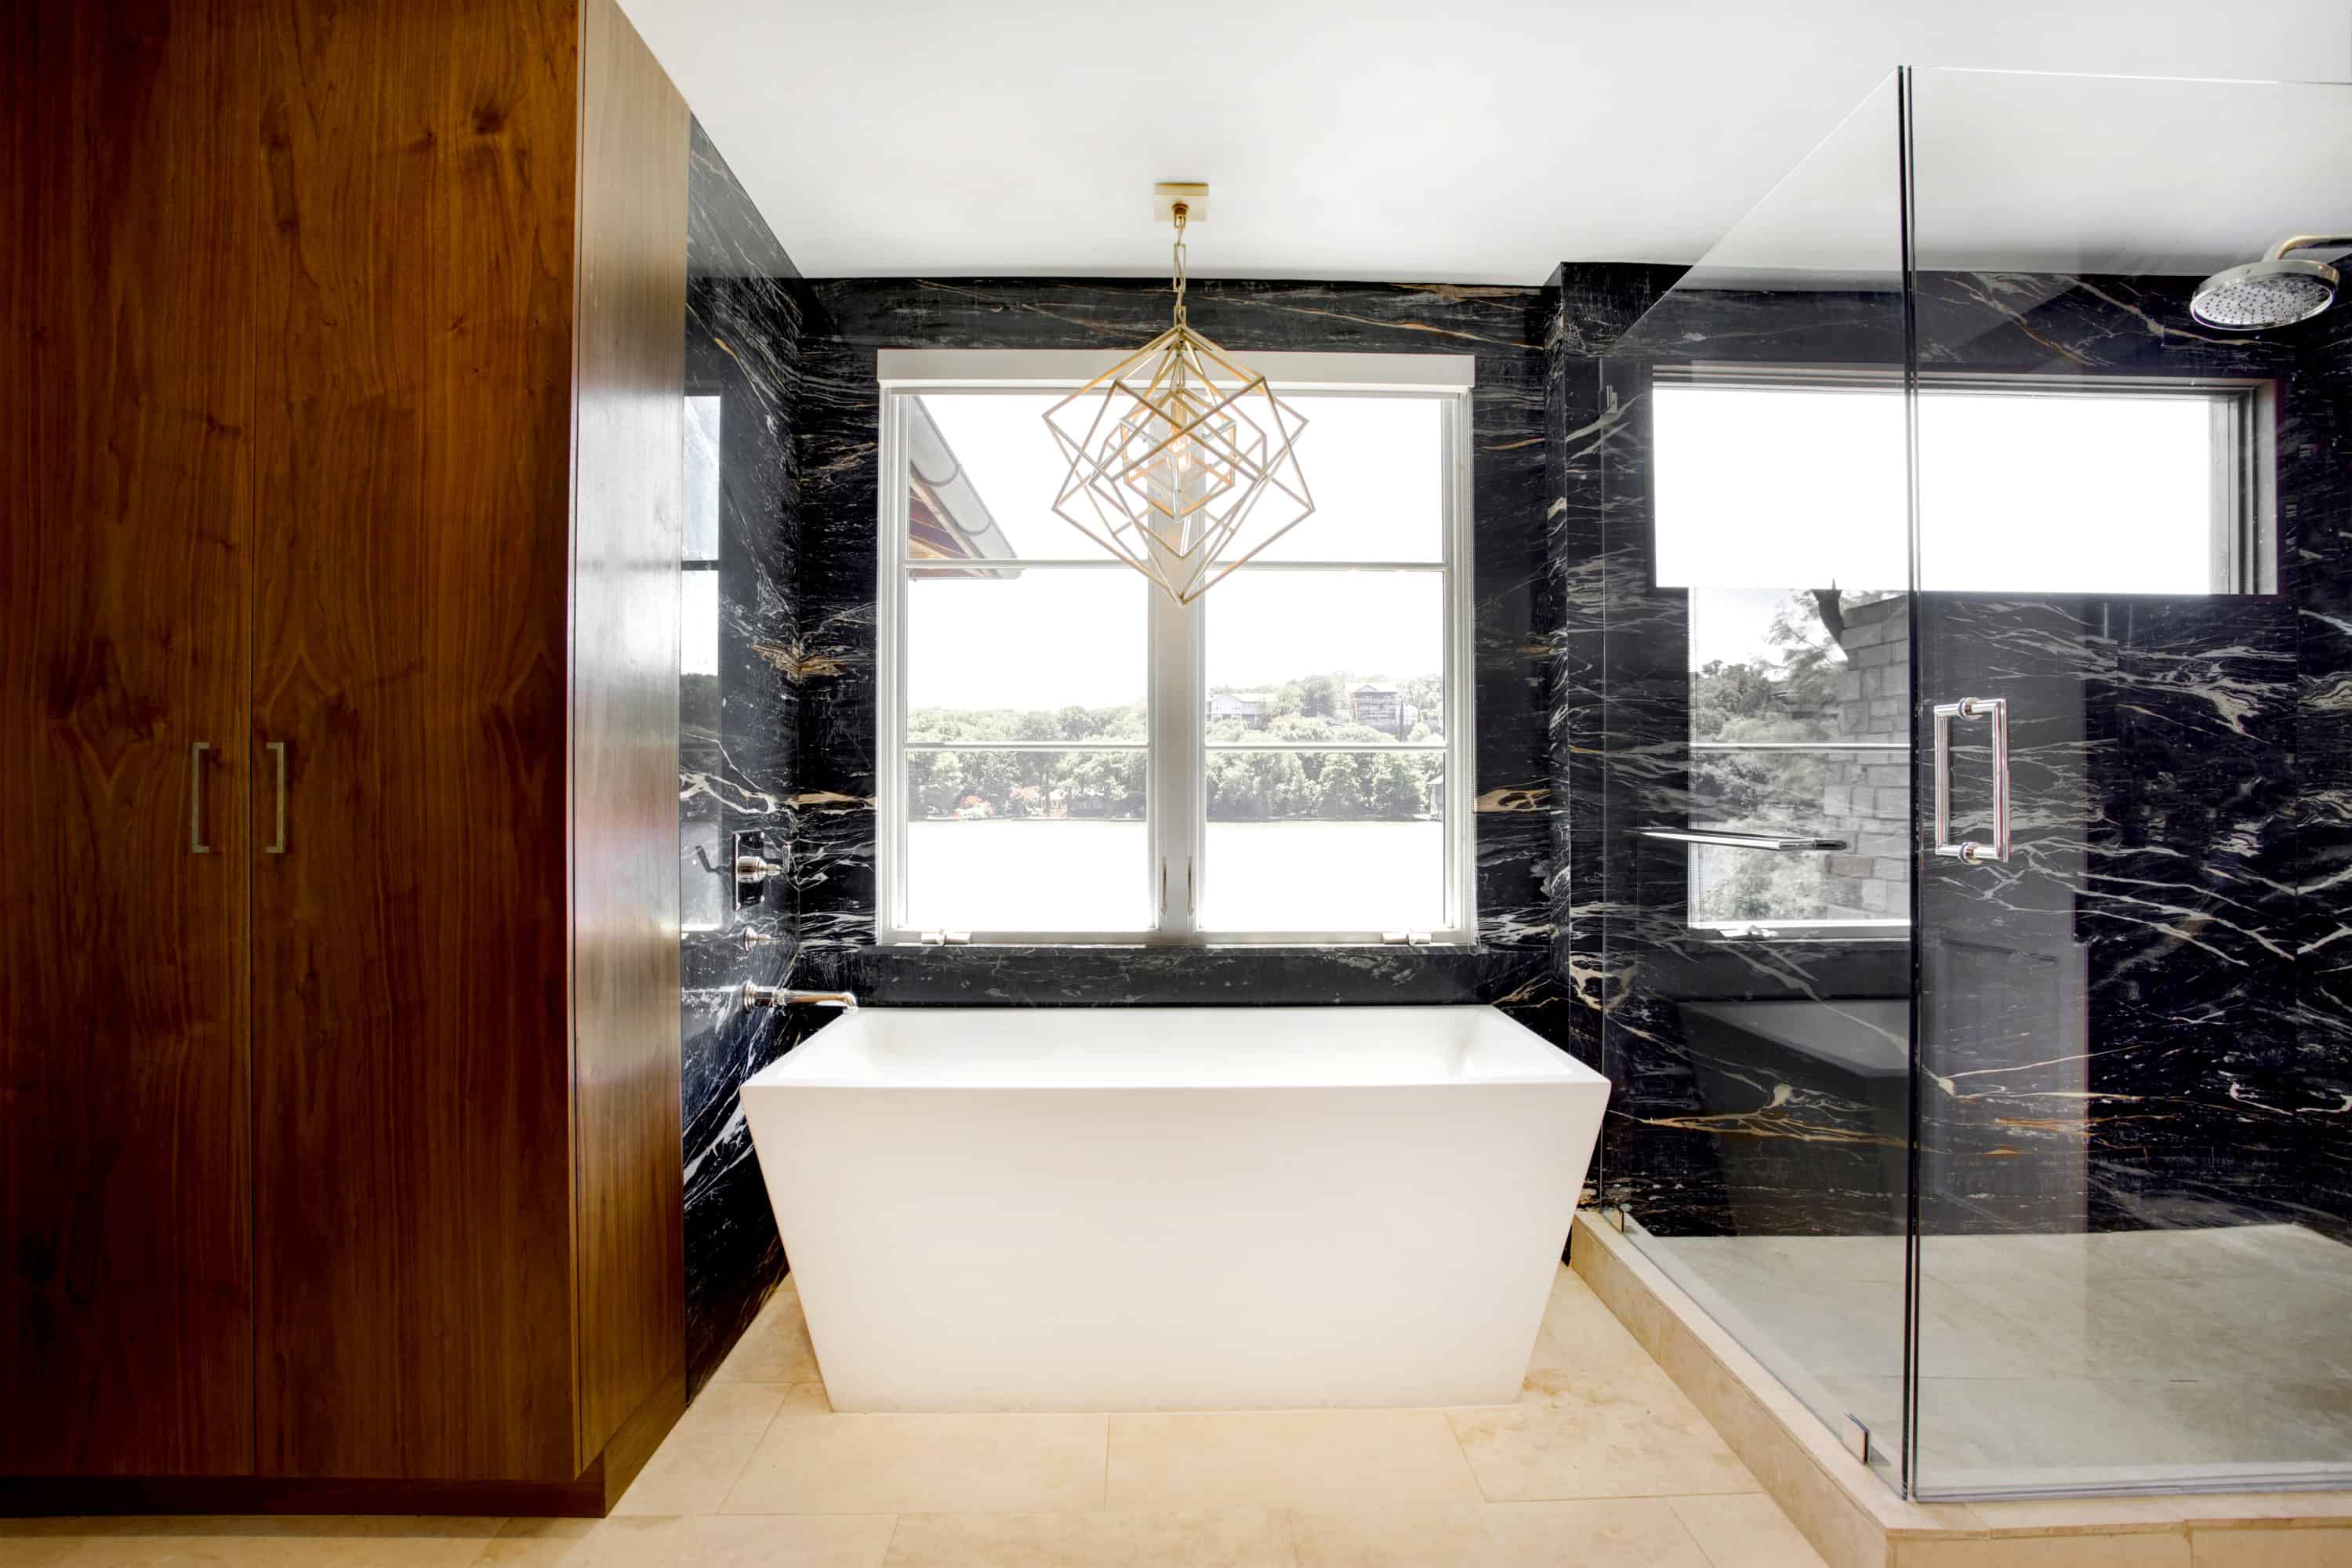 Natural stone goes naturally in this lovely bath